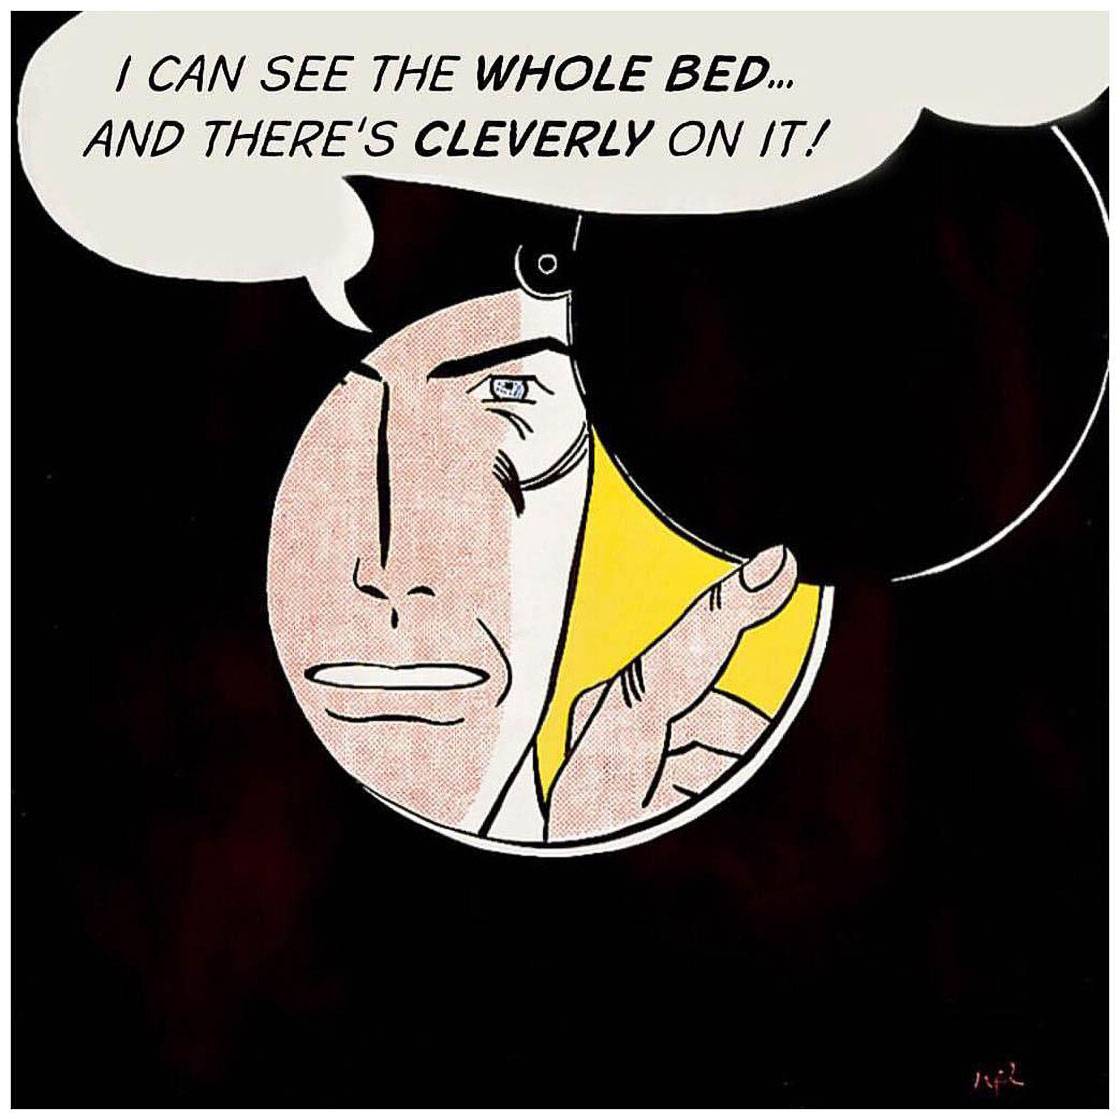 Roy Lichtenstein. I Can See the Whole Room… and There's Nobody In It. 1961